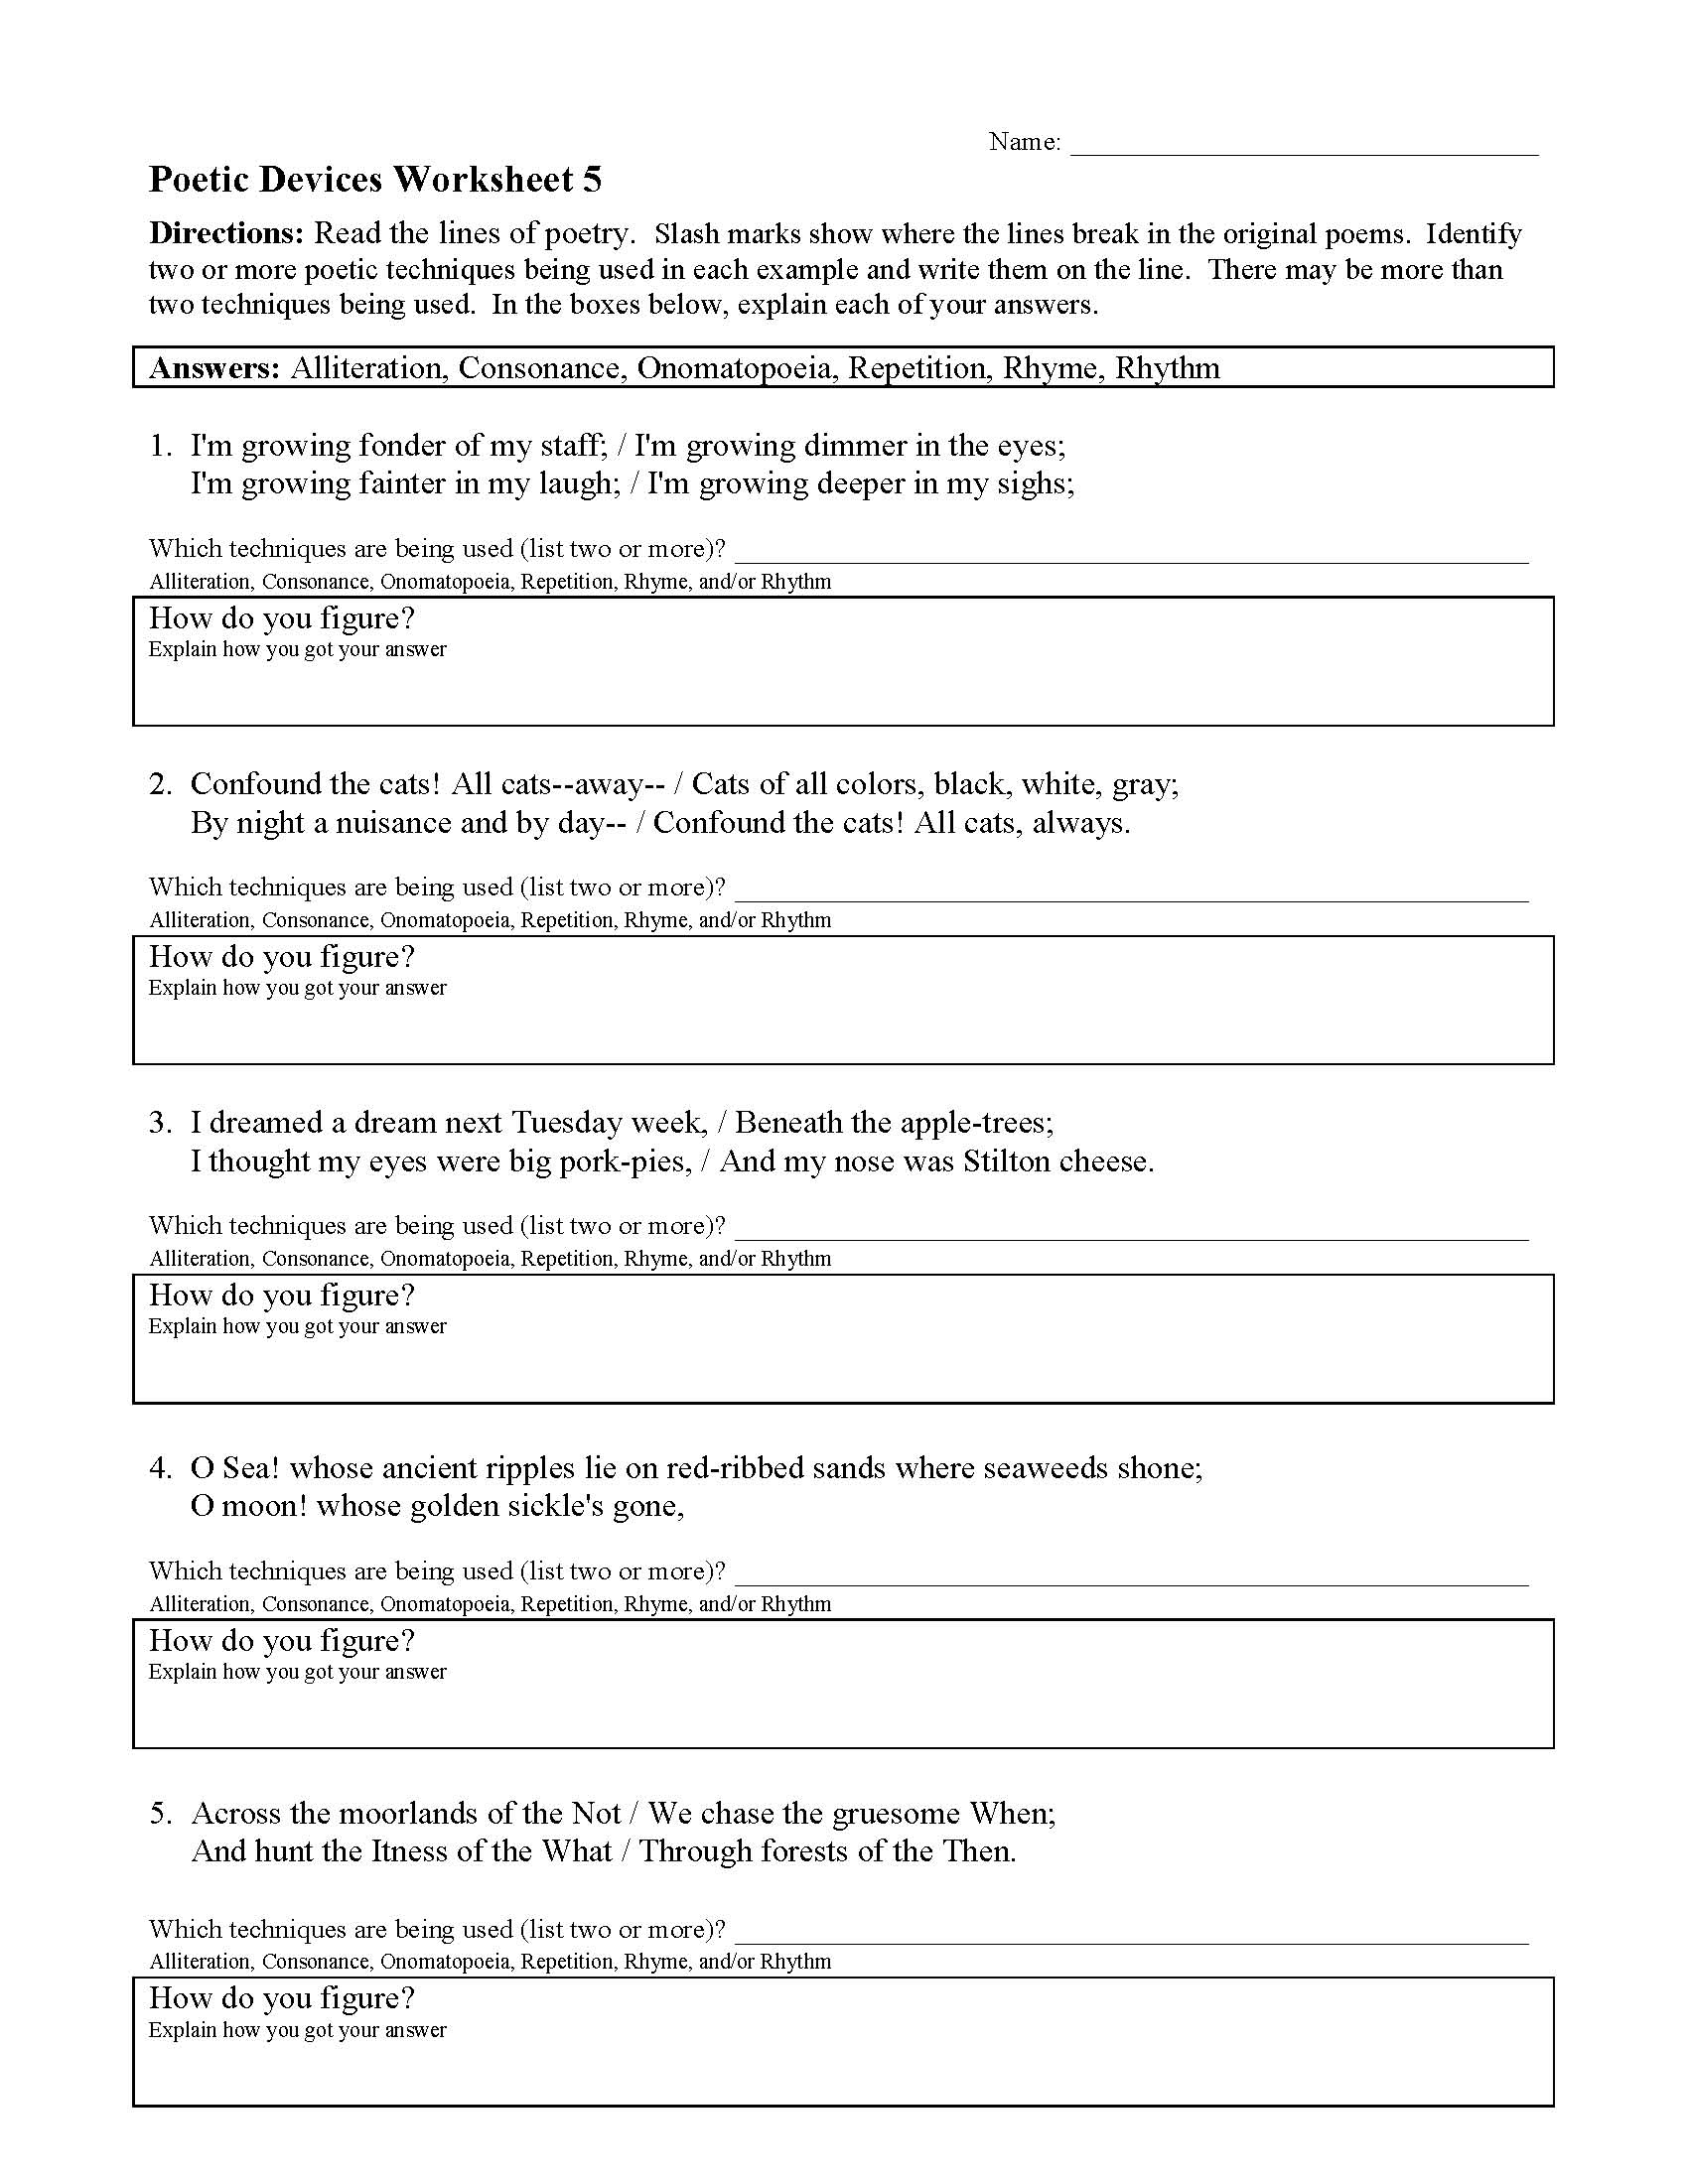 Poetic Devices Worksheet 25  Reading Activity Intended For Elements Of Poetry Worksheet